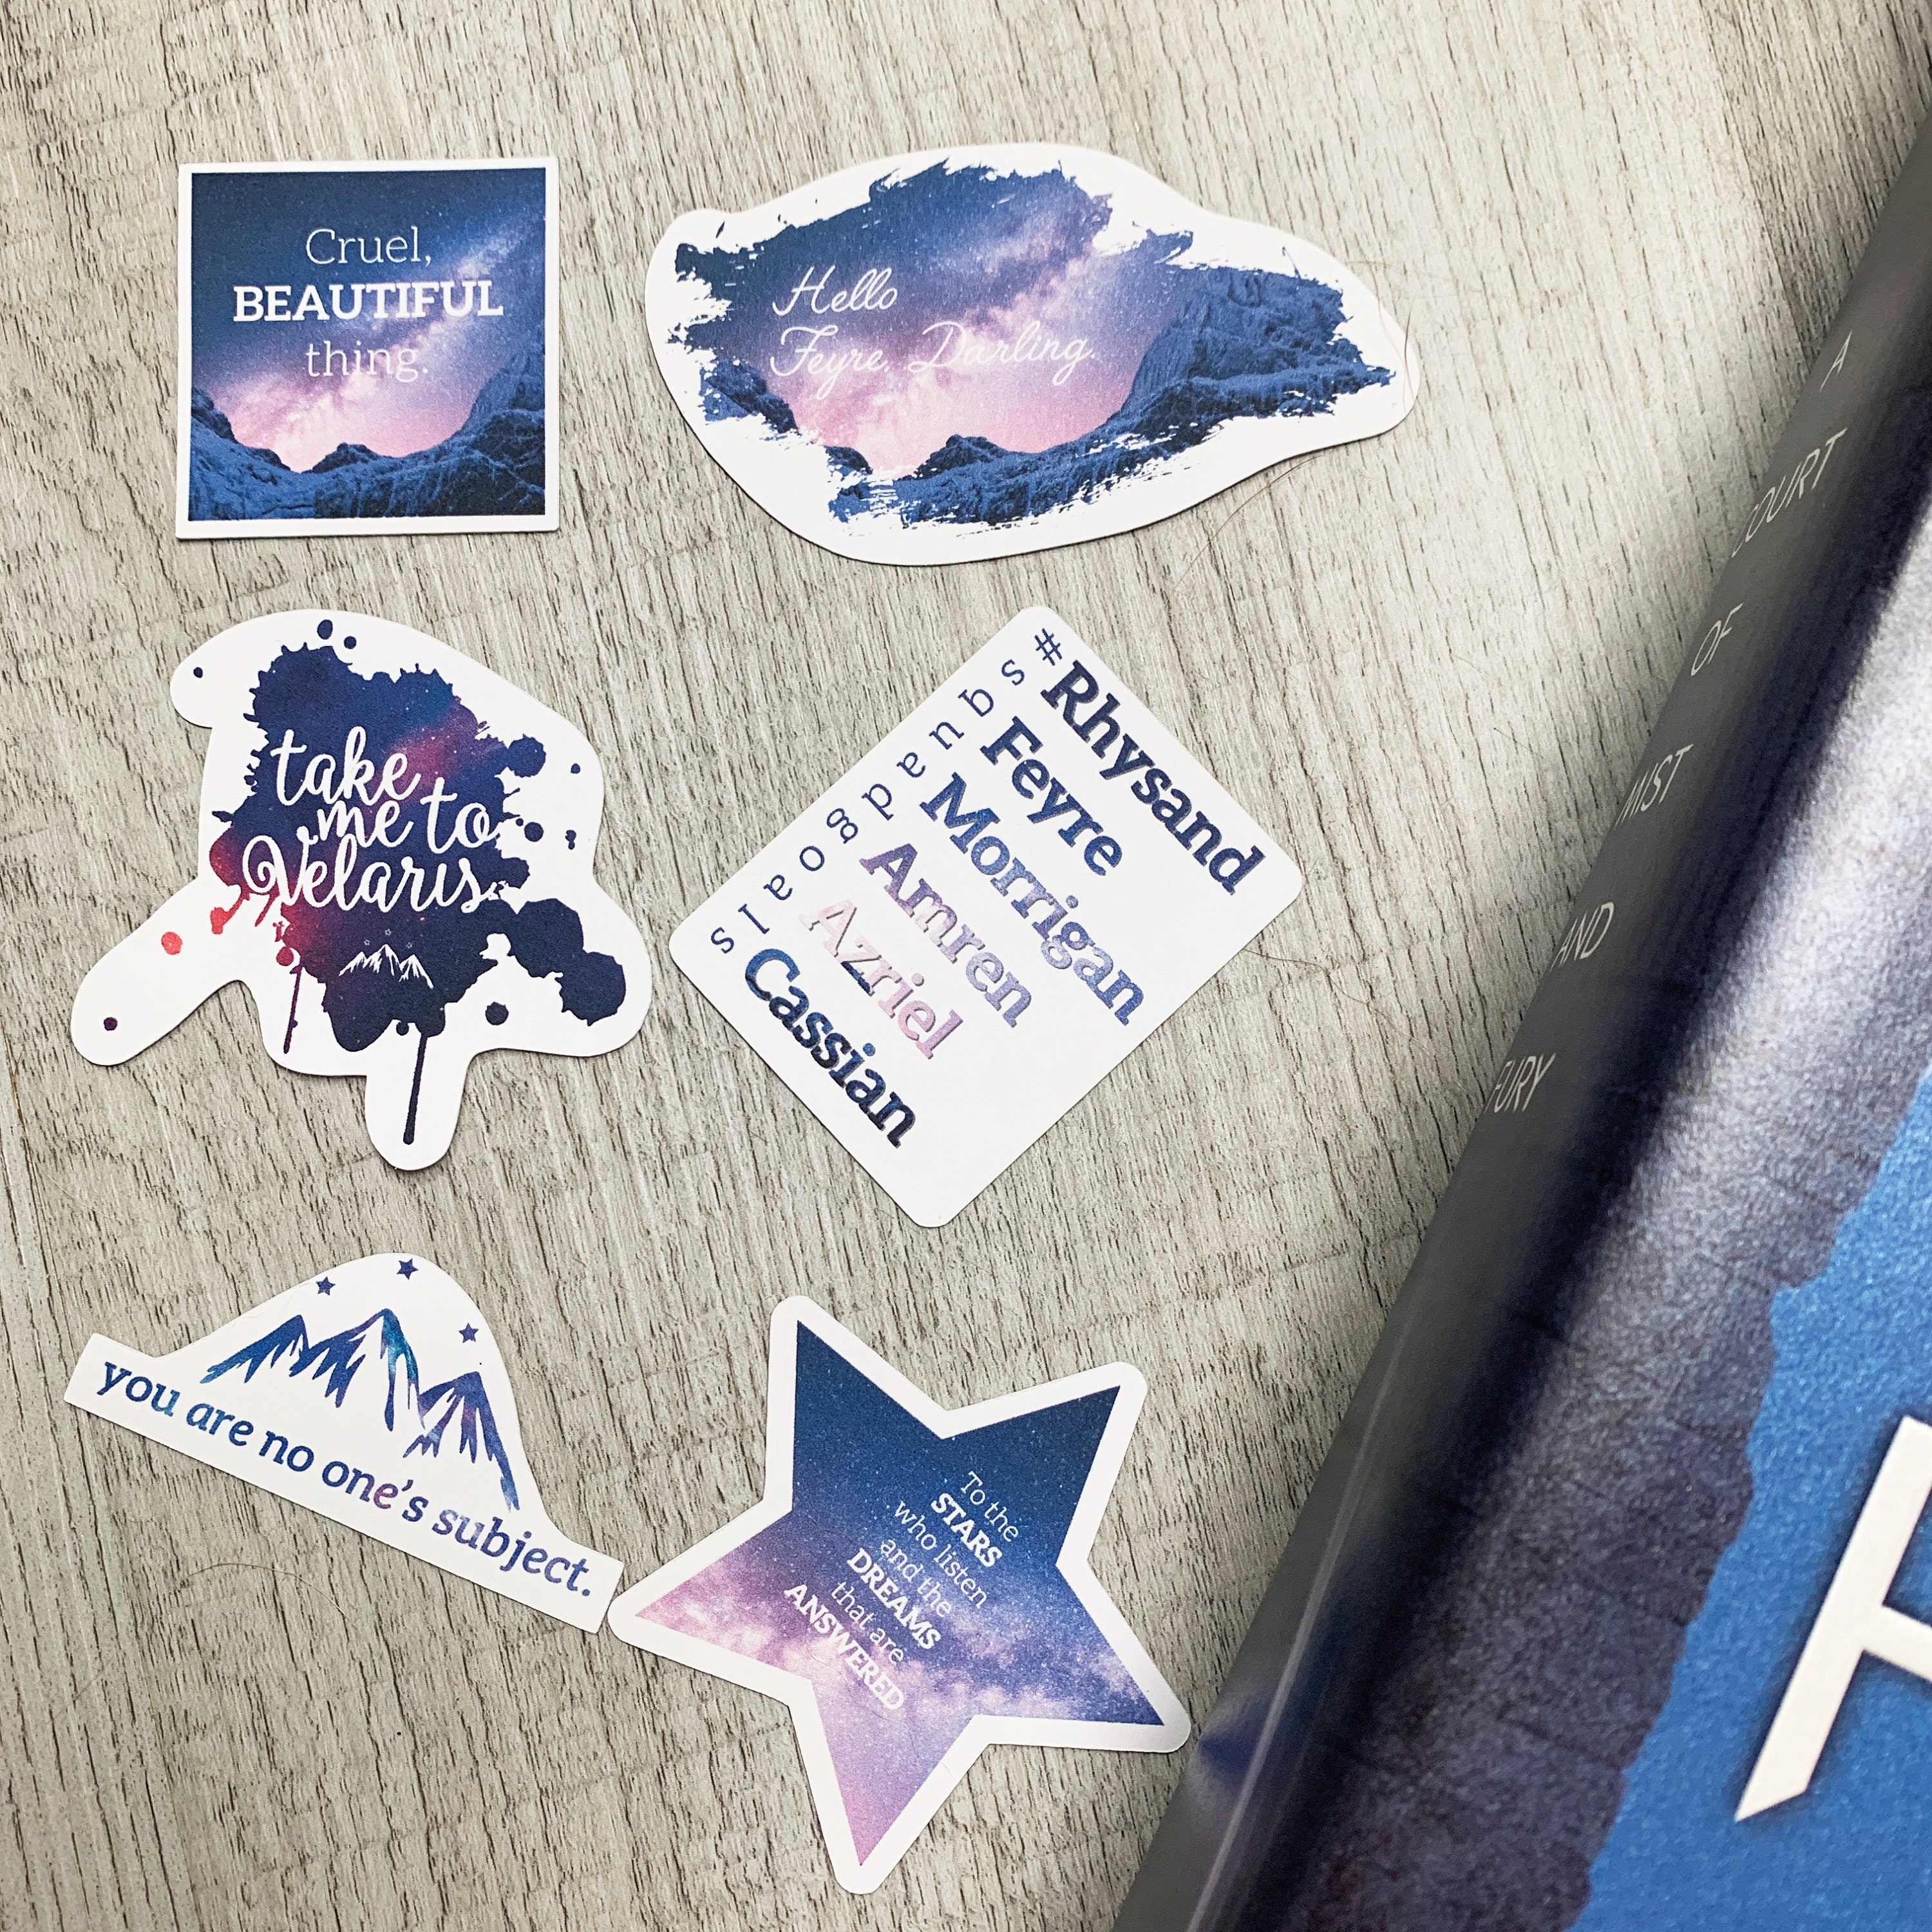 A Court of Mist and Fury Sticker Set ACOMAF Sticker Set Bookish Stickers  Book Stickers Rhys and Feyre Stickers ACOTAR Stickers 